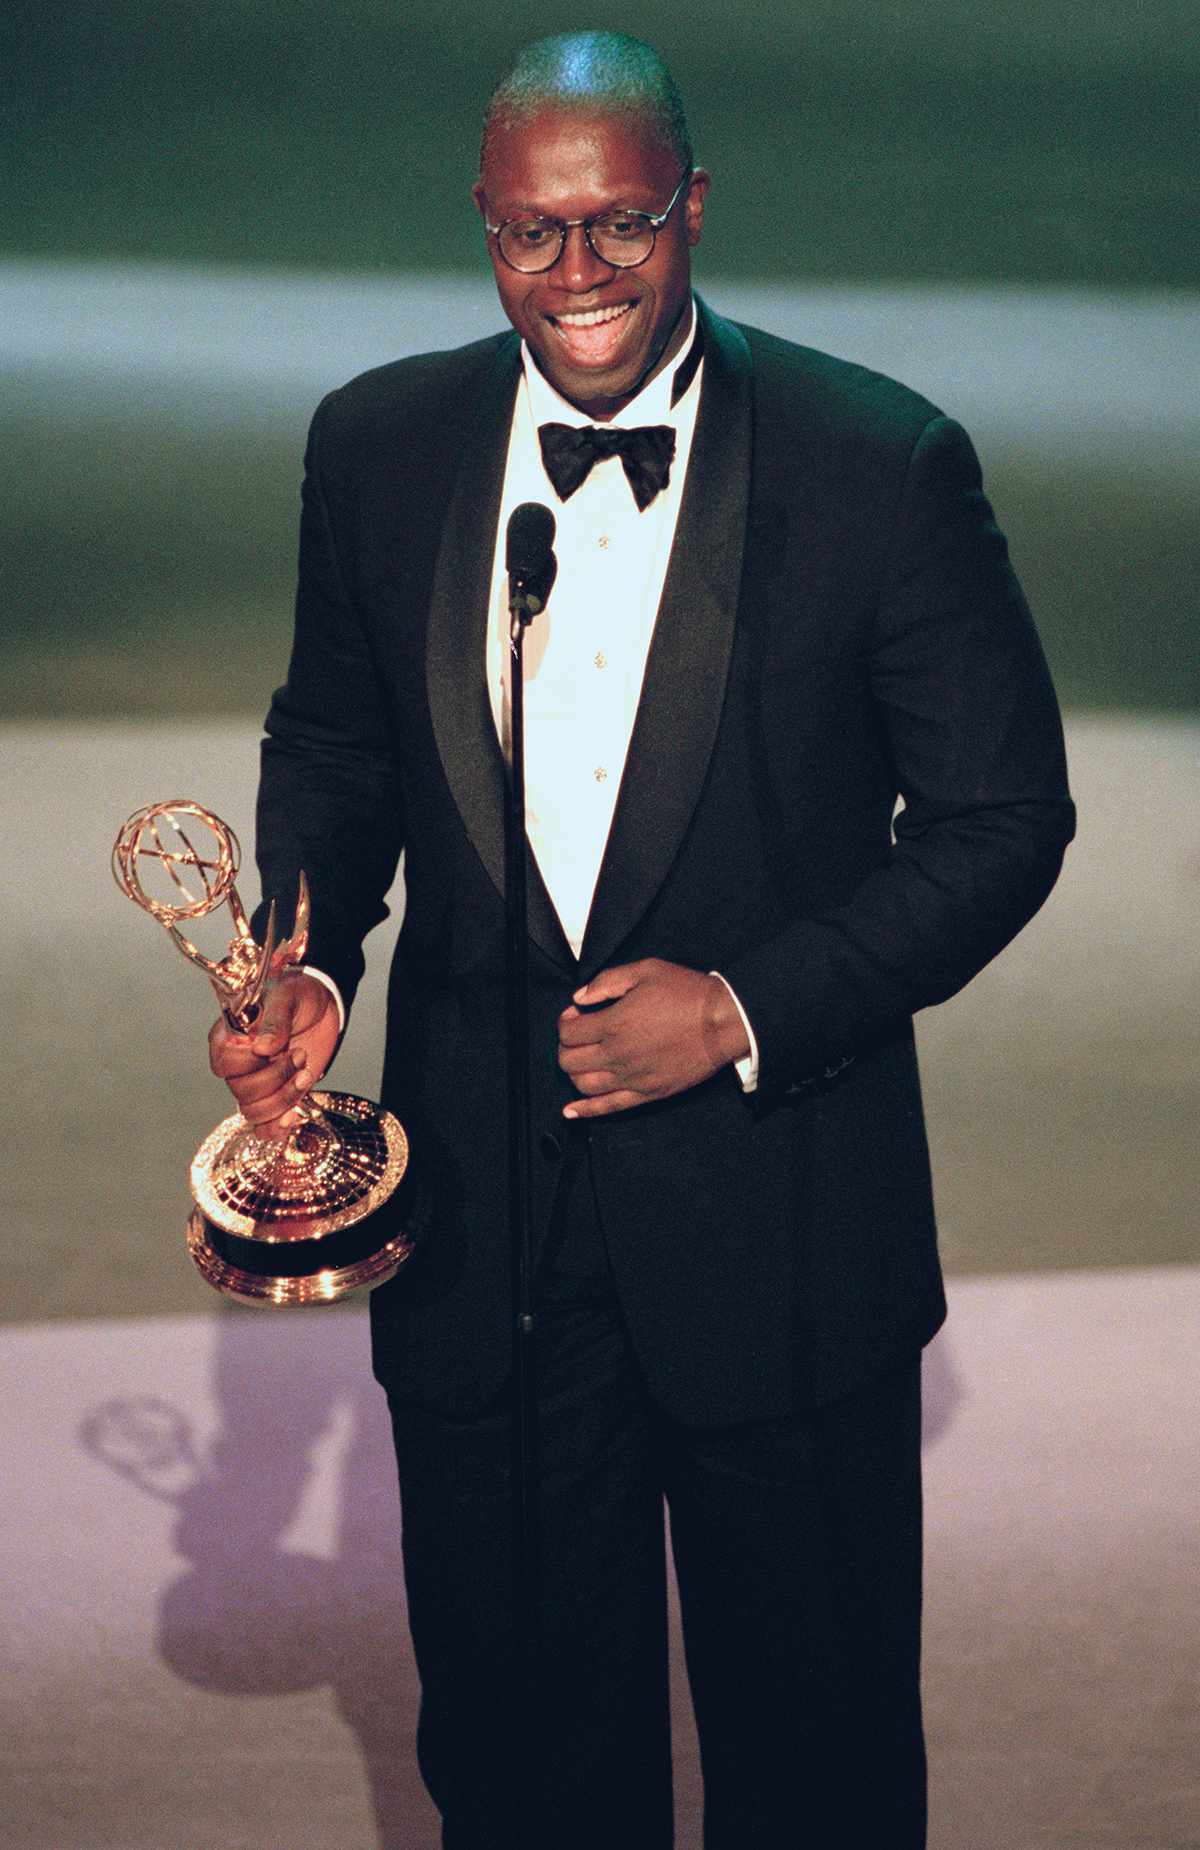 Outstanding Lead Actor in a Drama Series NBC's "Homicide: Life on the Street" Andre Braugher during the 50th Annual Primetime Emmy Awards held at the Shrine Auditorium in Los Angeles, CA on September 13, 1998 